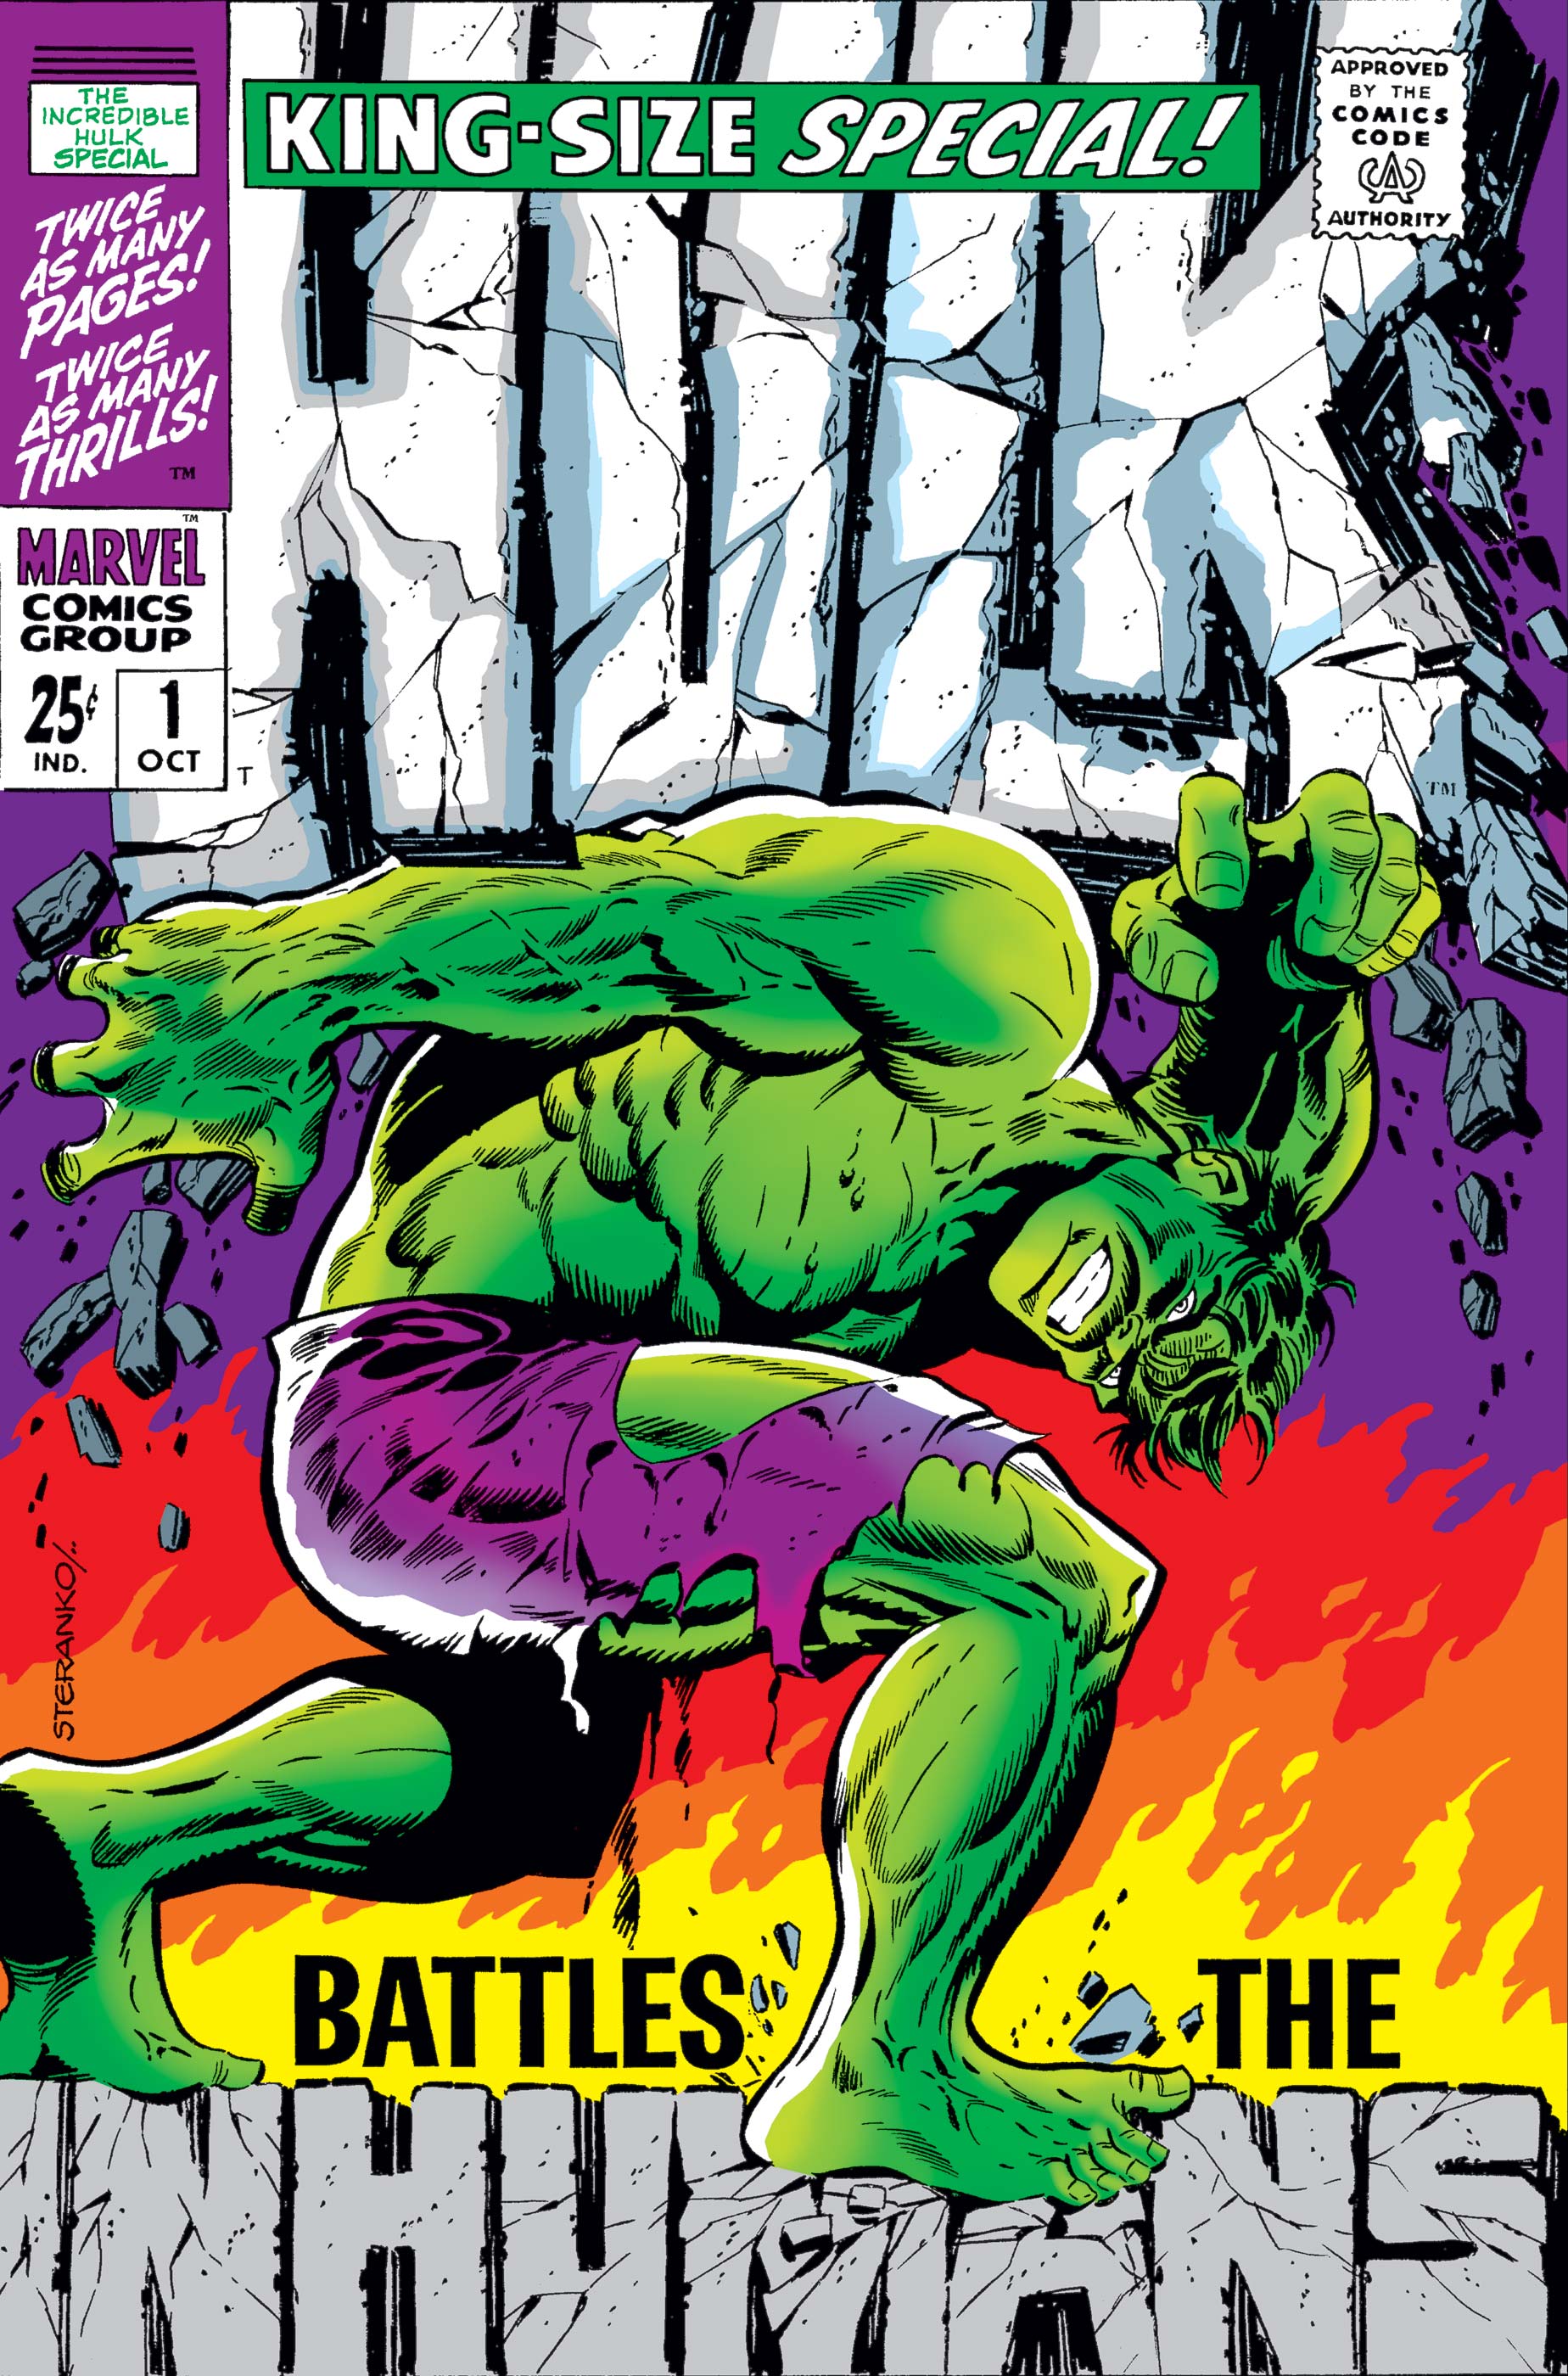 HULK KING-SIZE SPECIAL #1 1968 Famous Cover Please Read